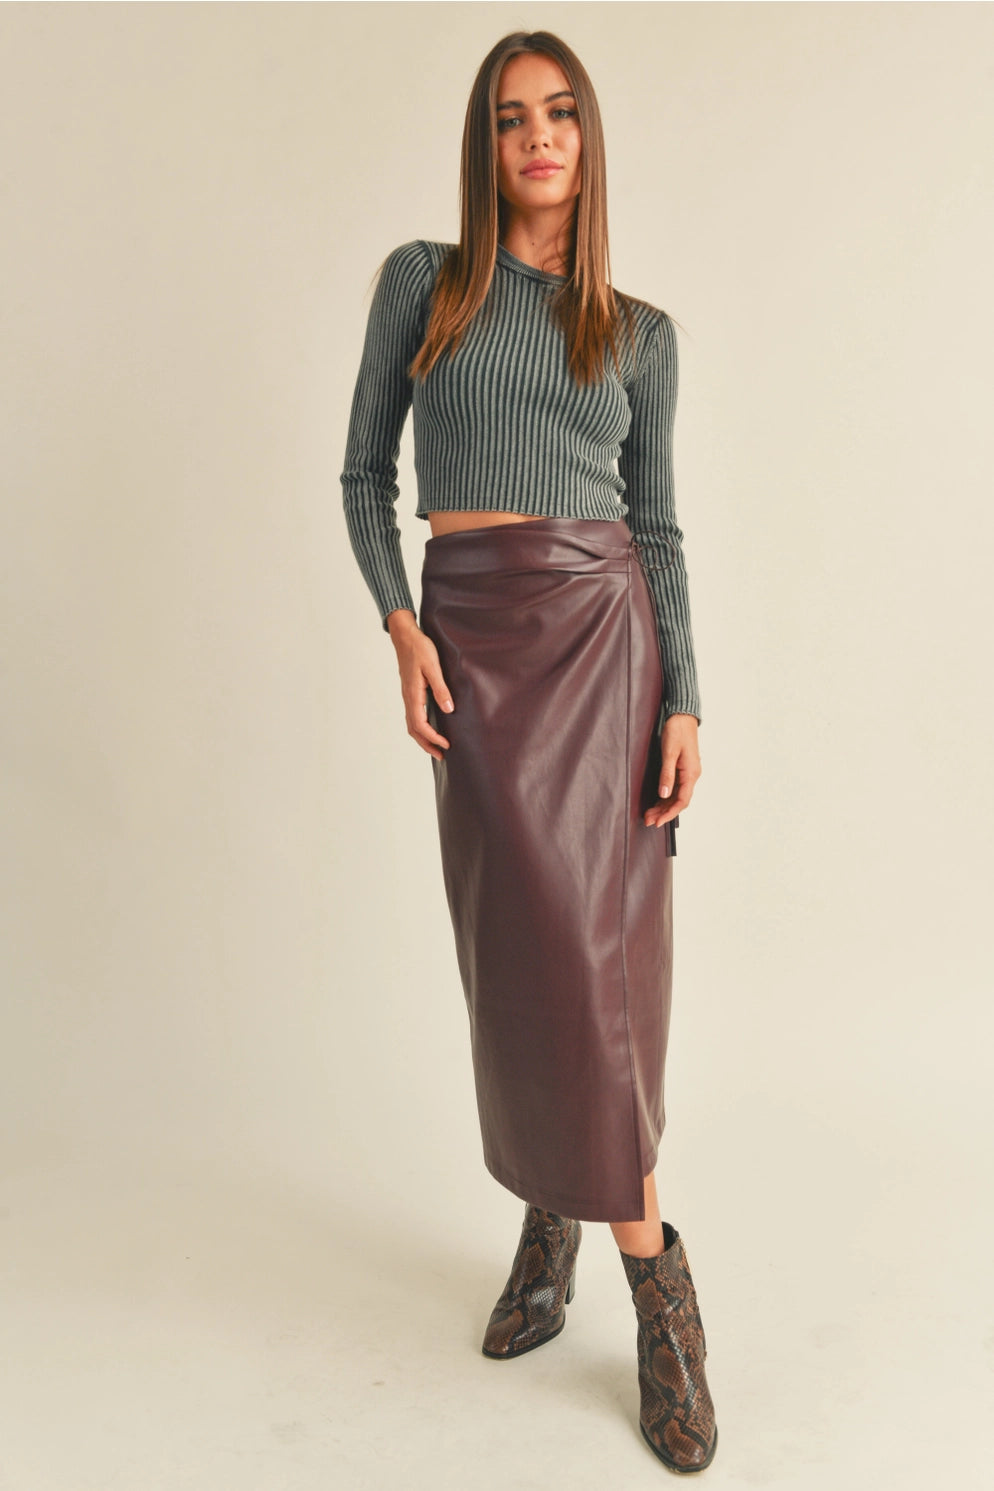 How We Do It Leather Skirt